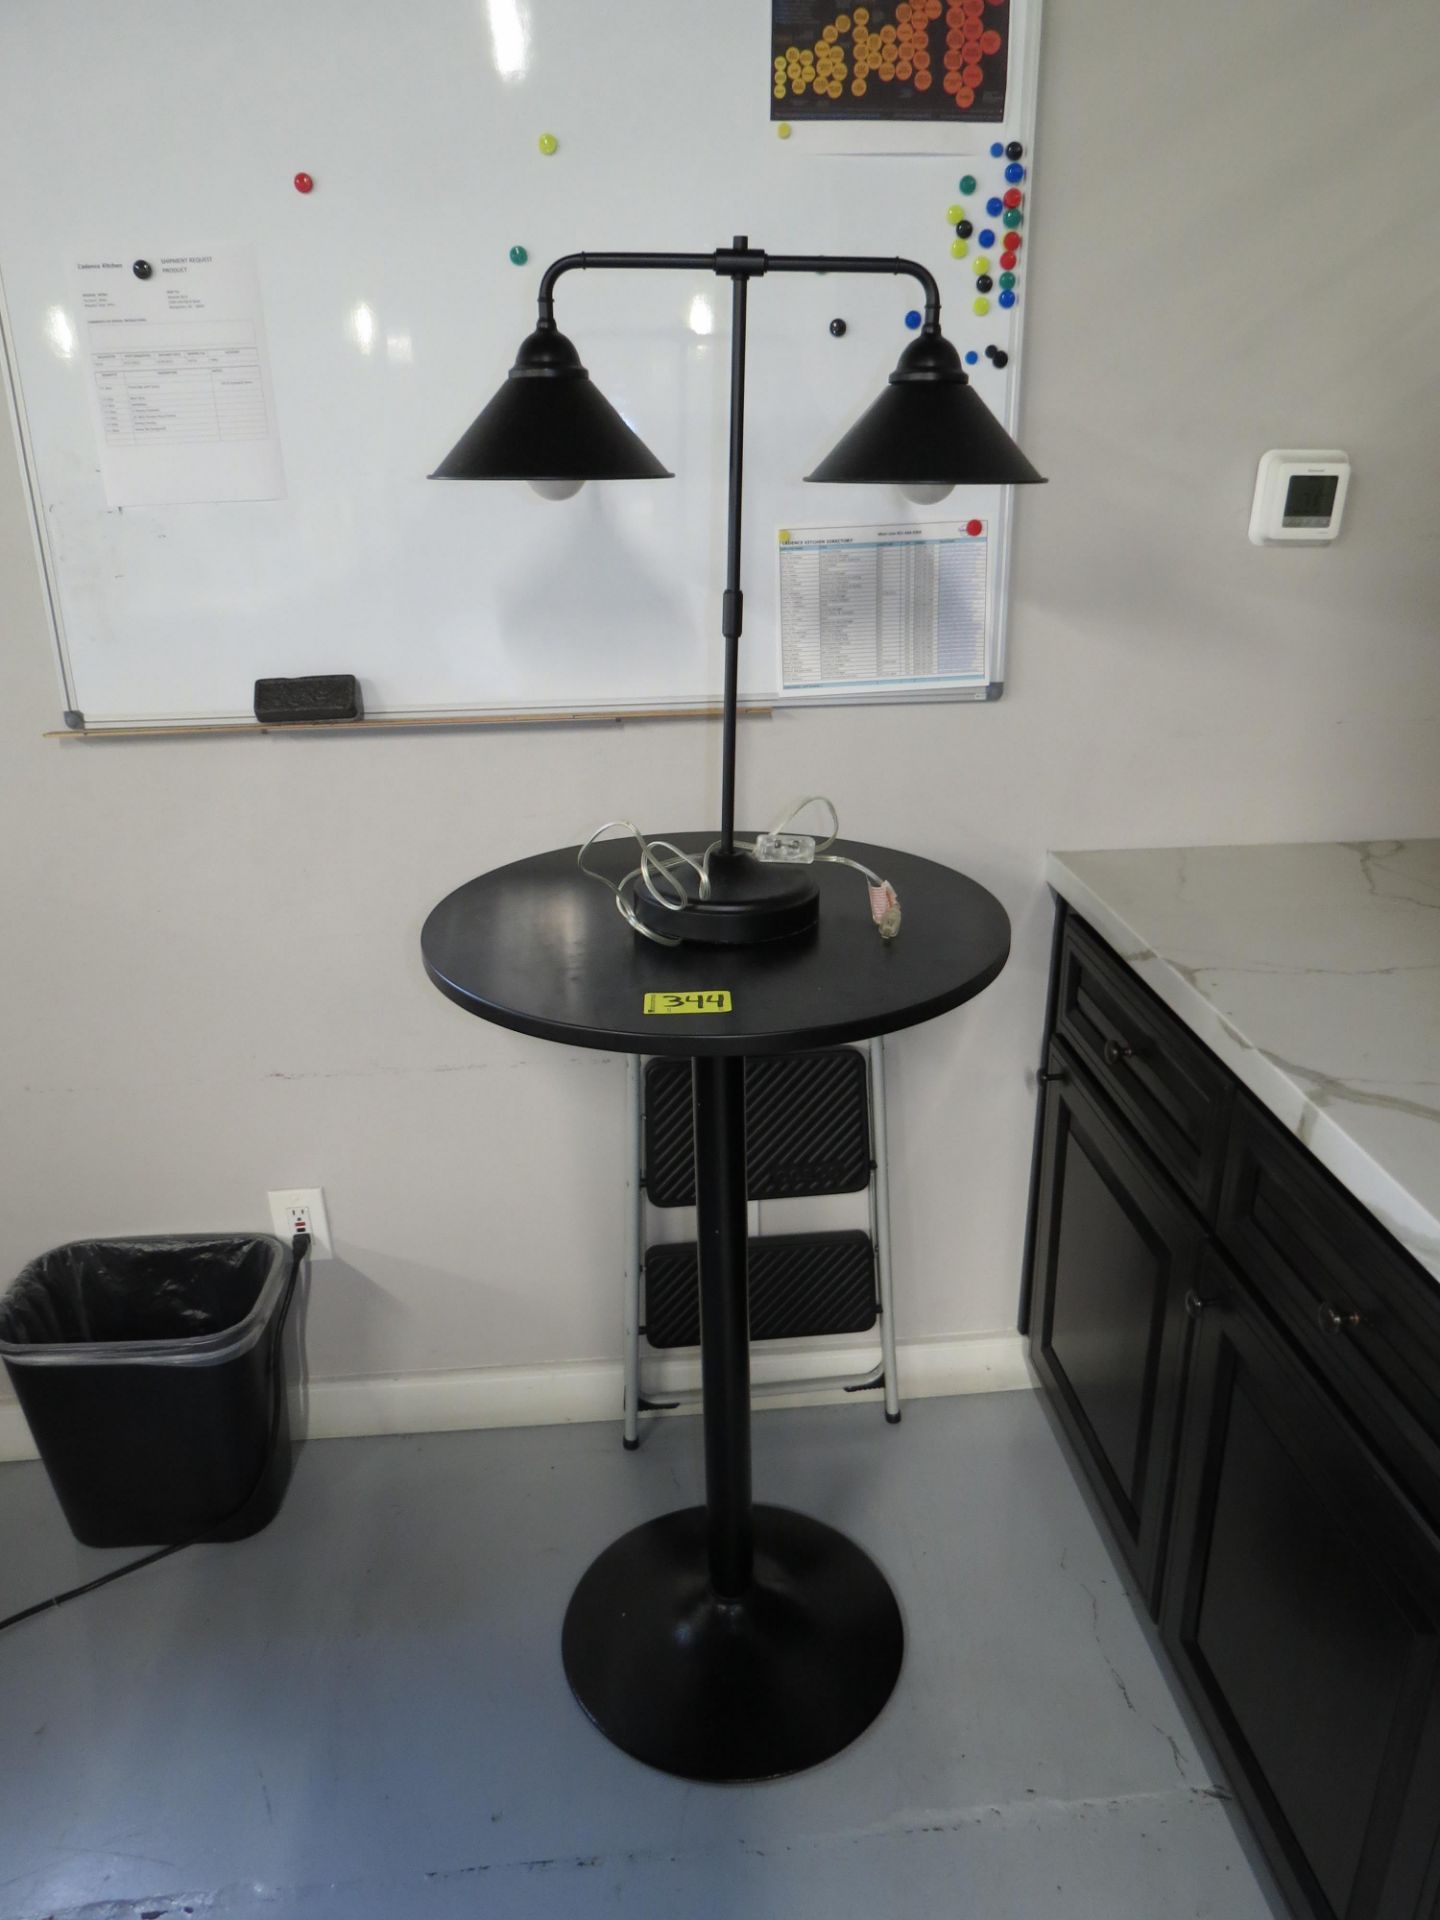 Lot Black Round Pub Table with Black Lamp